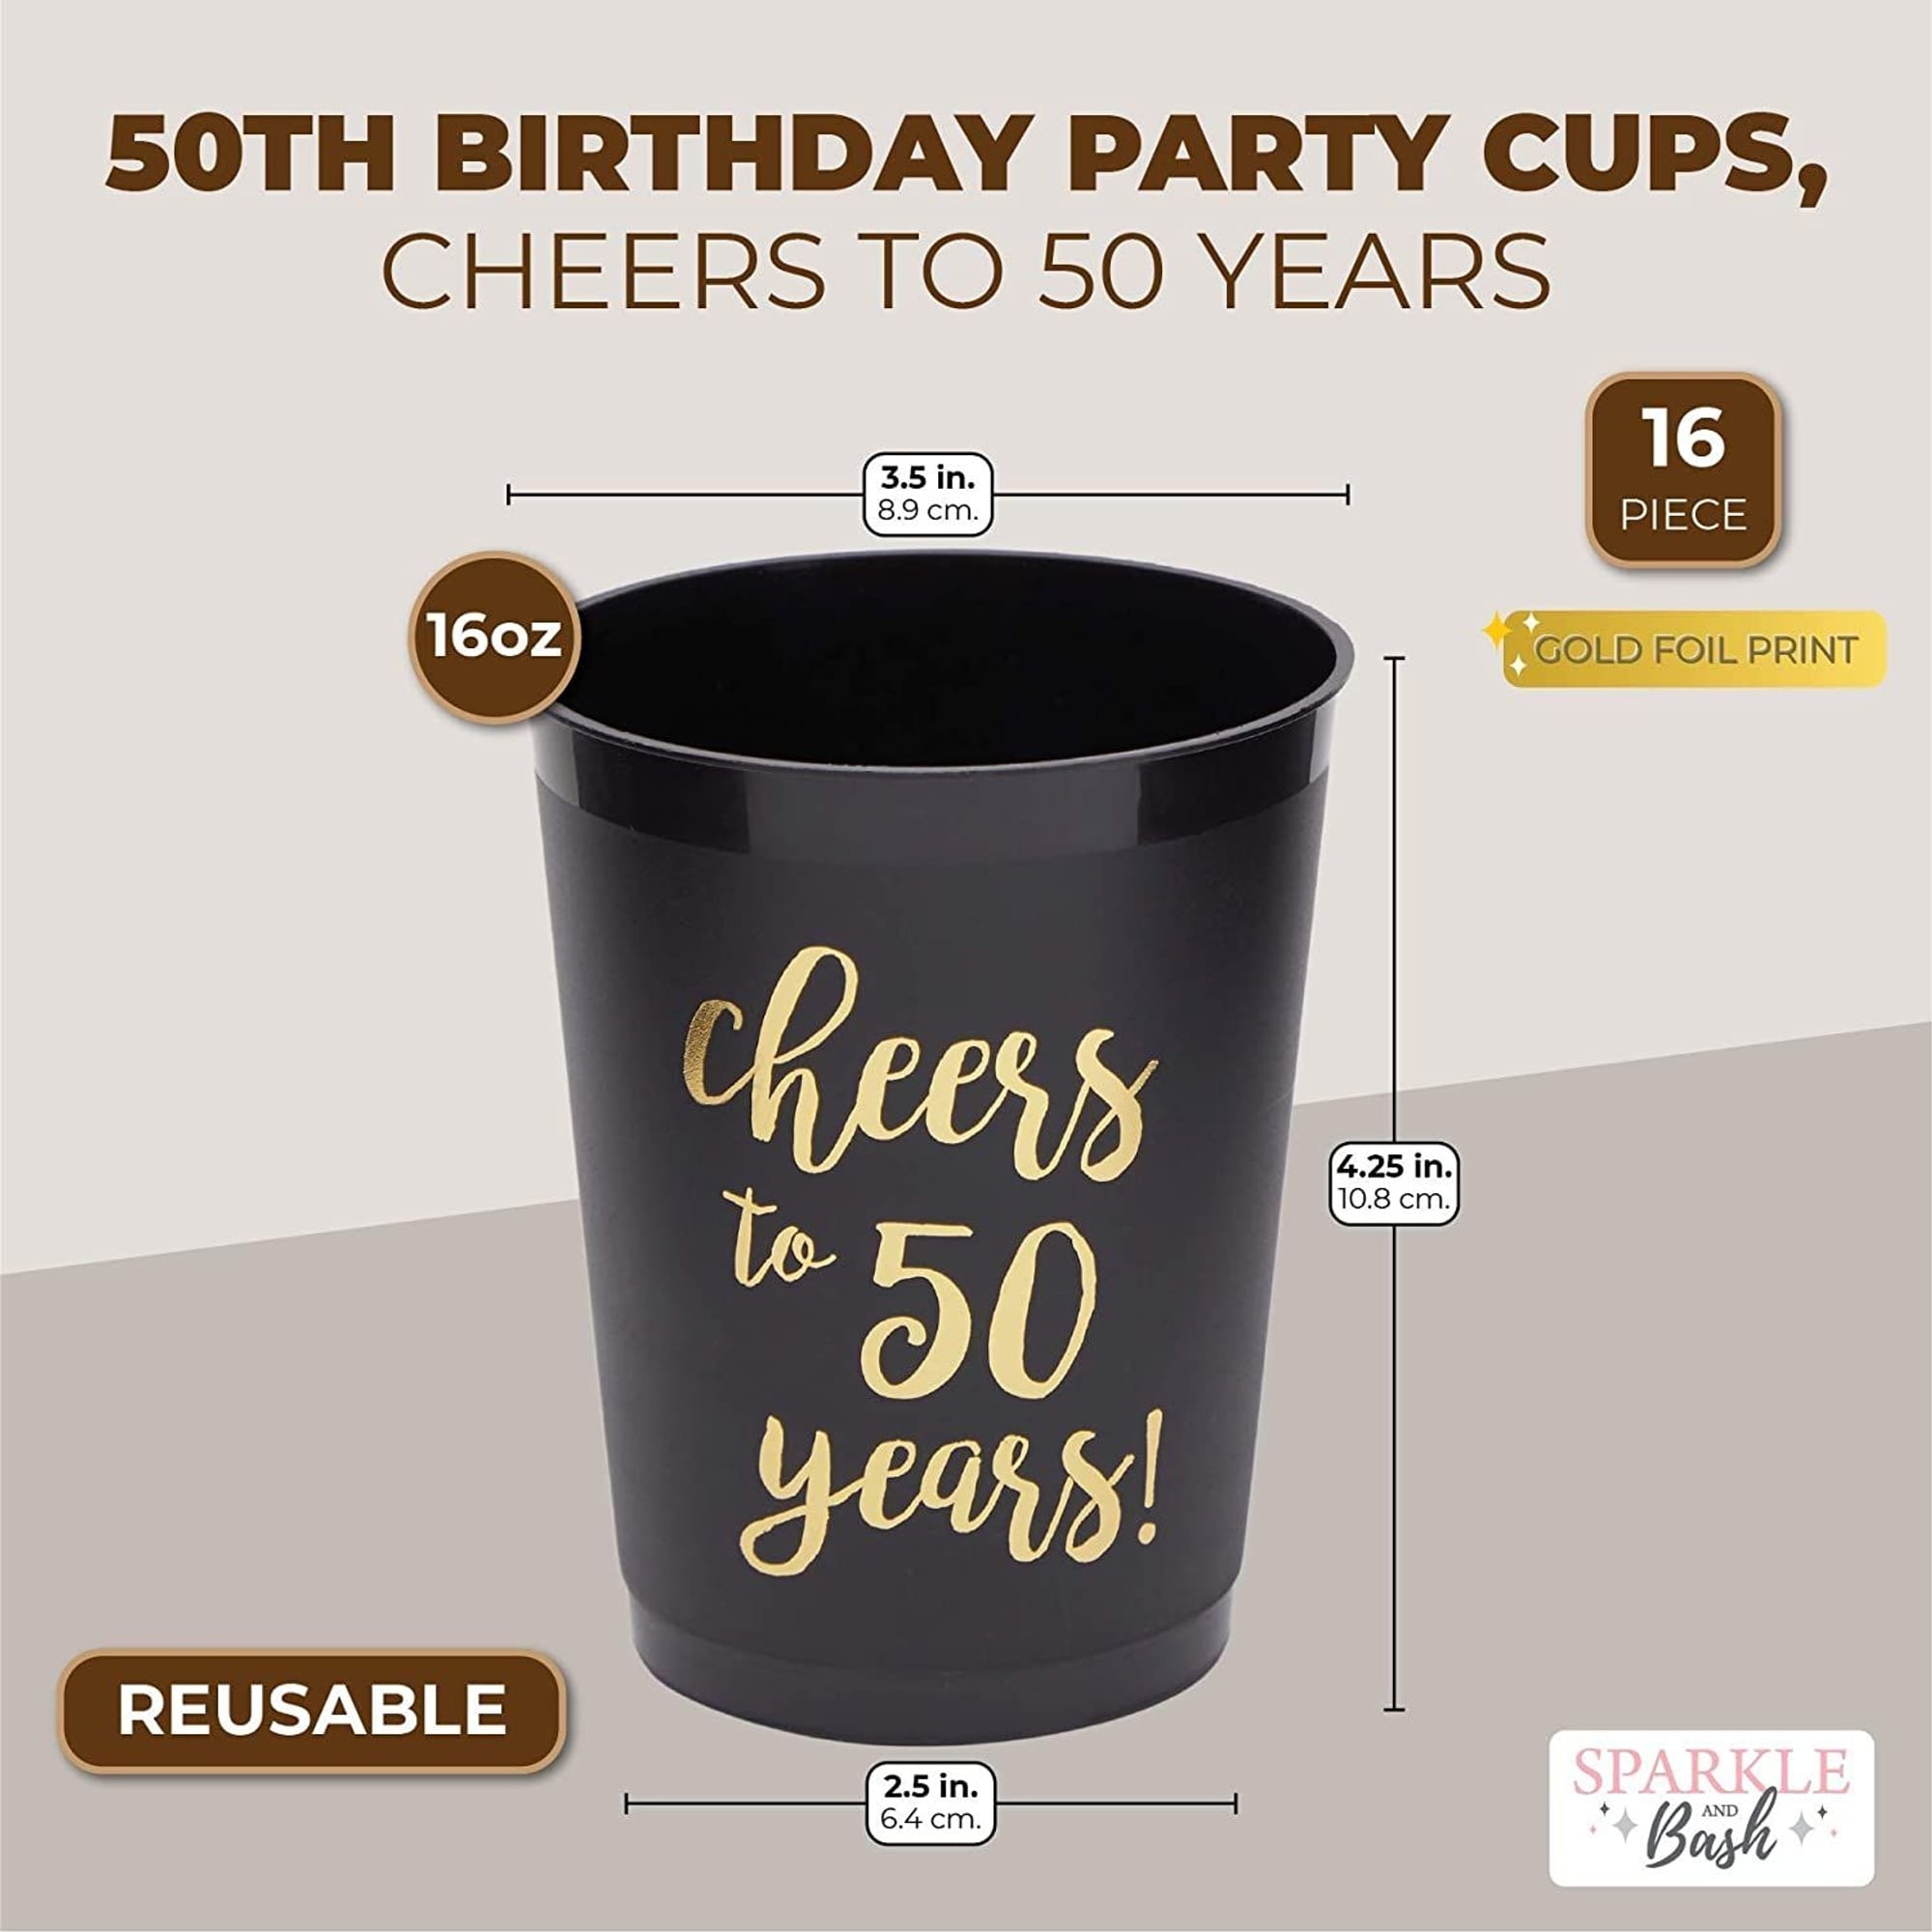 https://ak1.ostkcdn.com/images/products/is/images/direct/5747bfd5f3d486c472d581a66d42d03bfb26816e/50th-Birthday-Party-Cups%2C-Cheers-to-50-Years-%2816-oz%2C-16-Pack%29.jpg